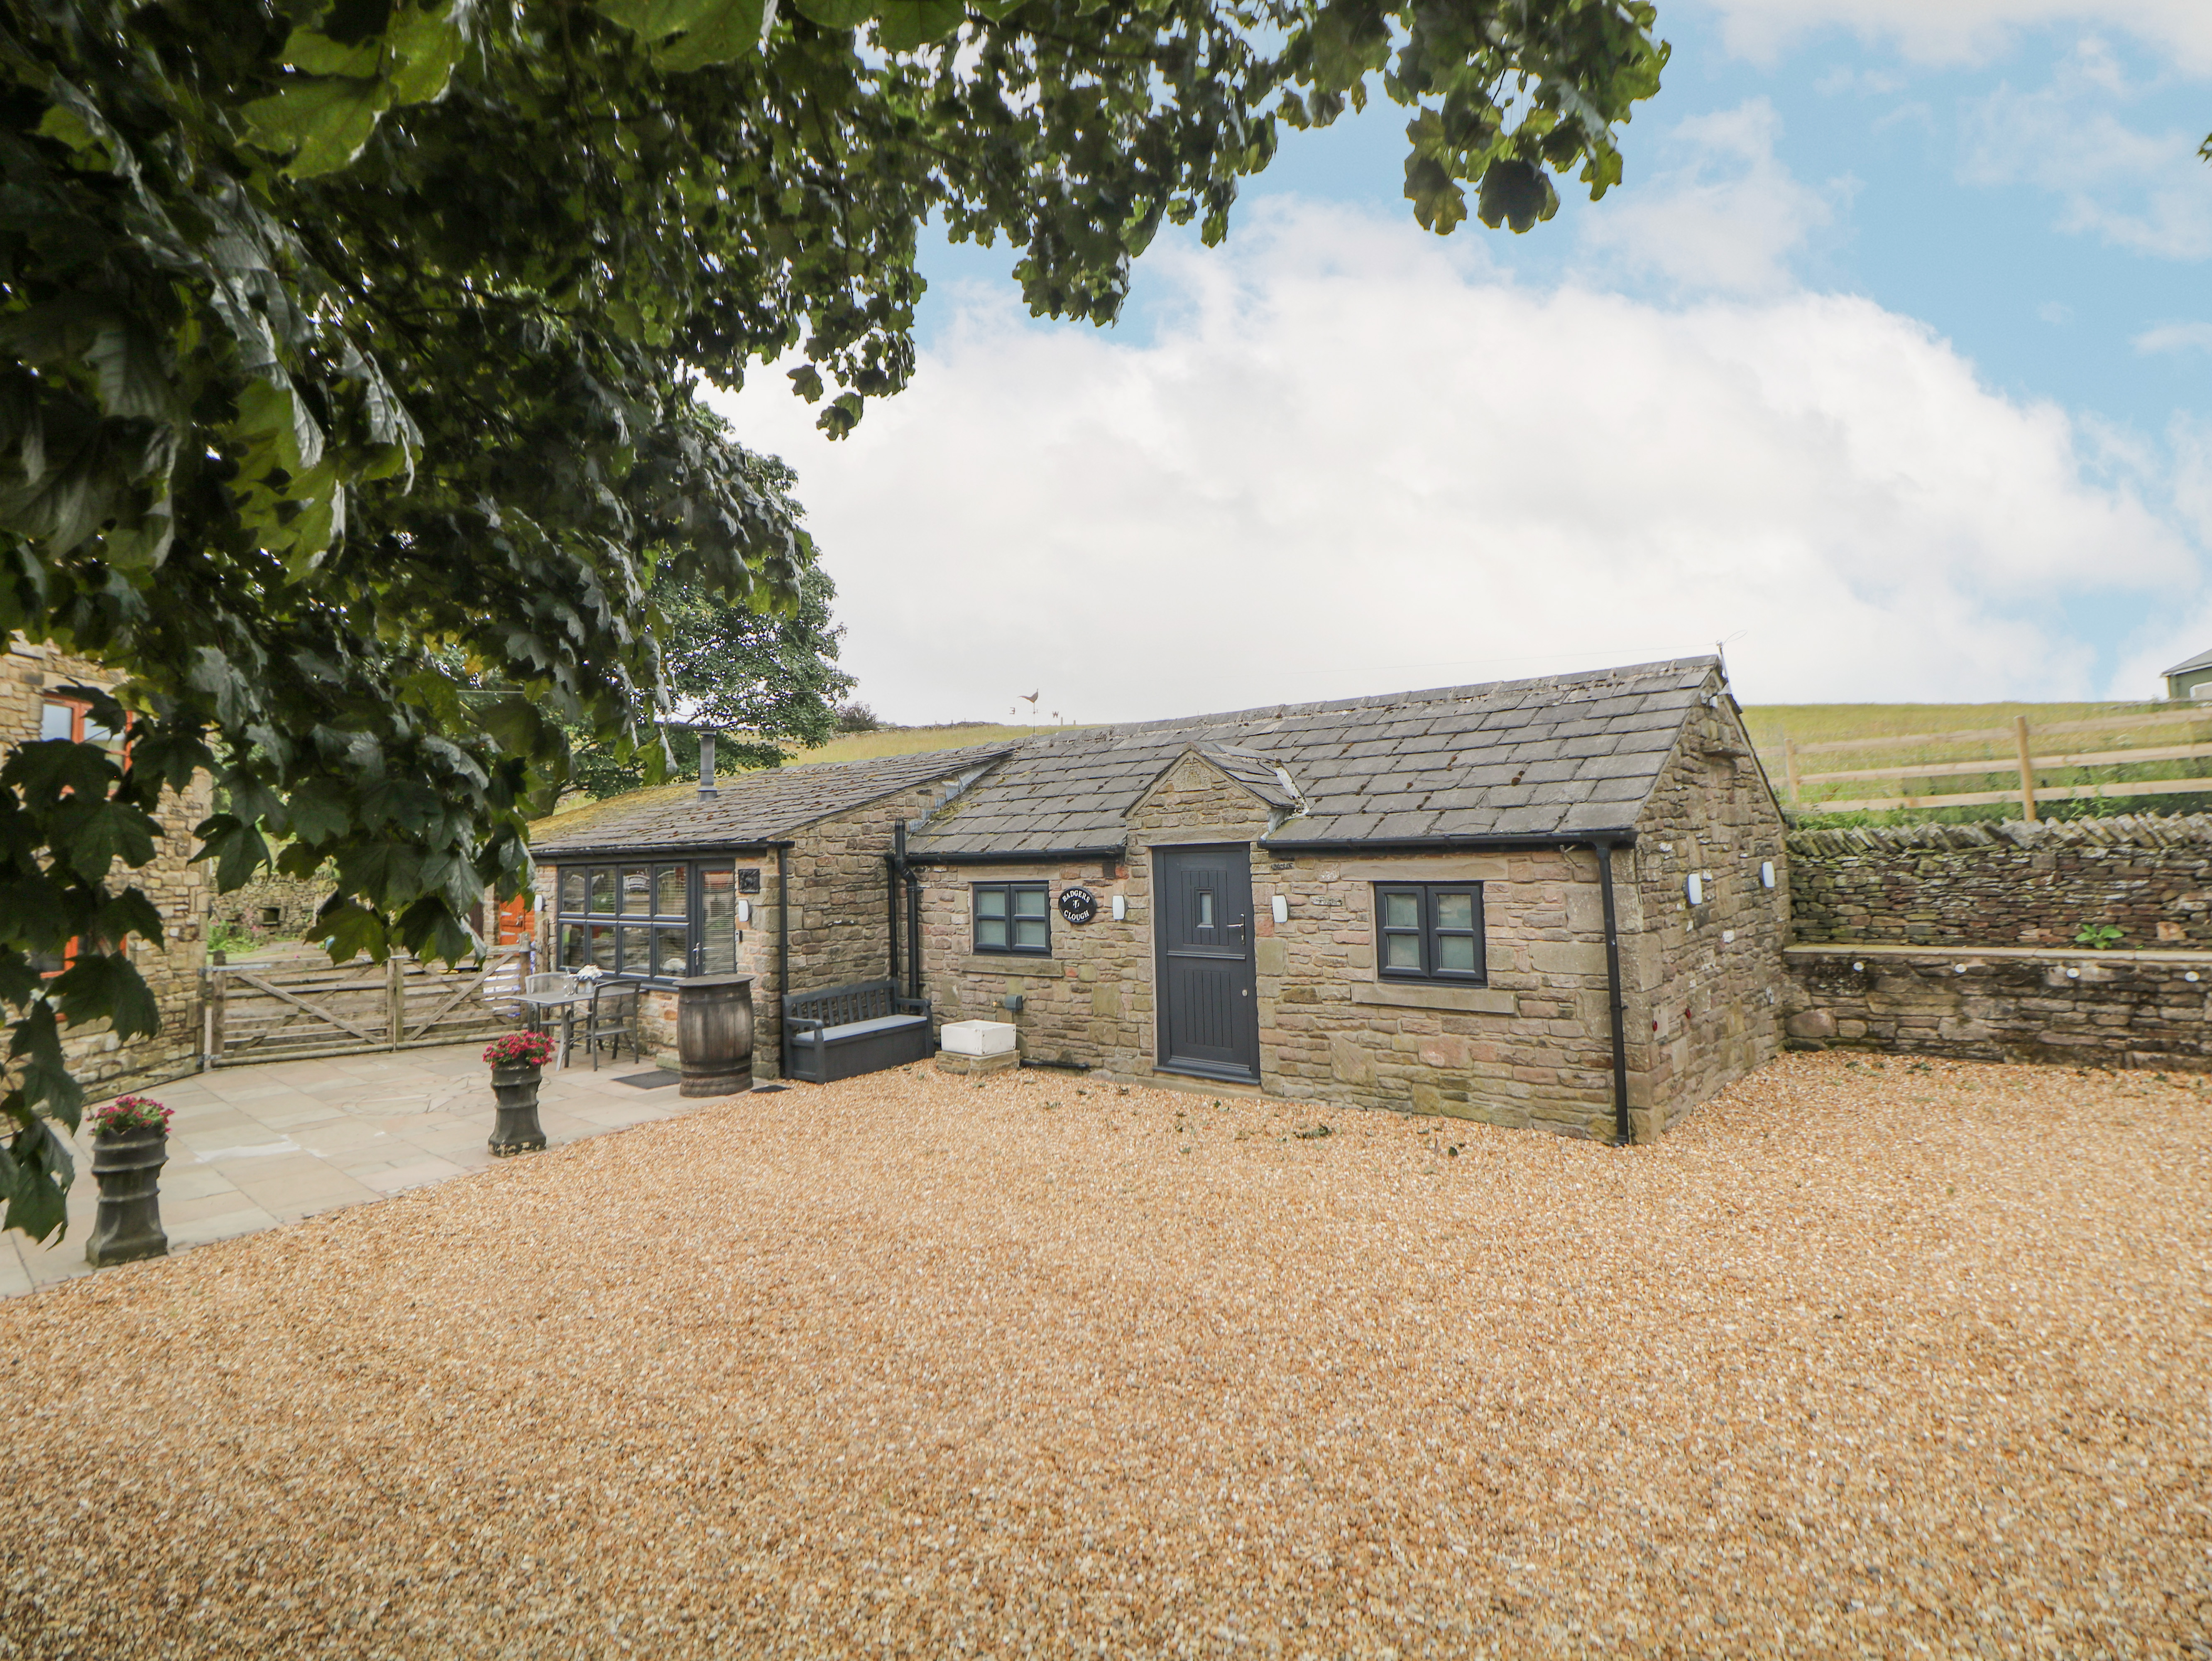 The Stables  at Badgers Clough Farm